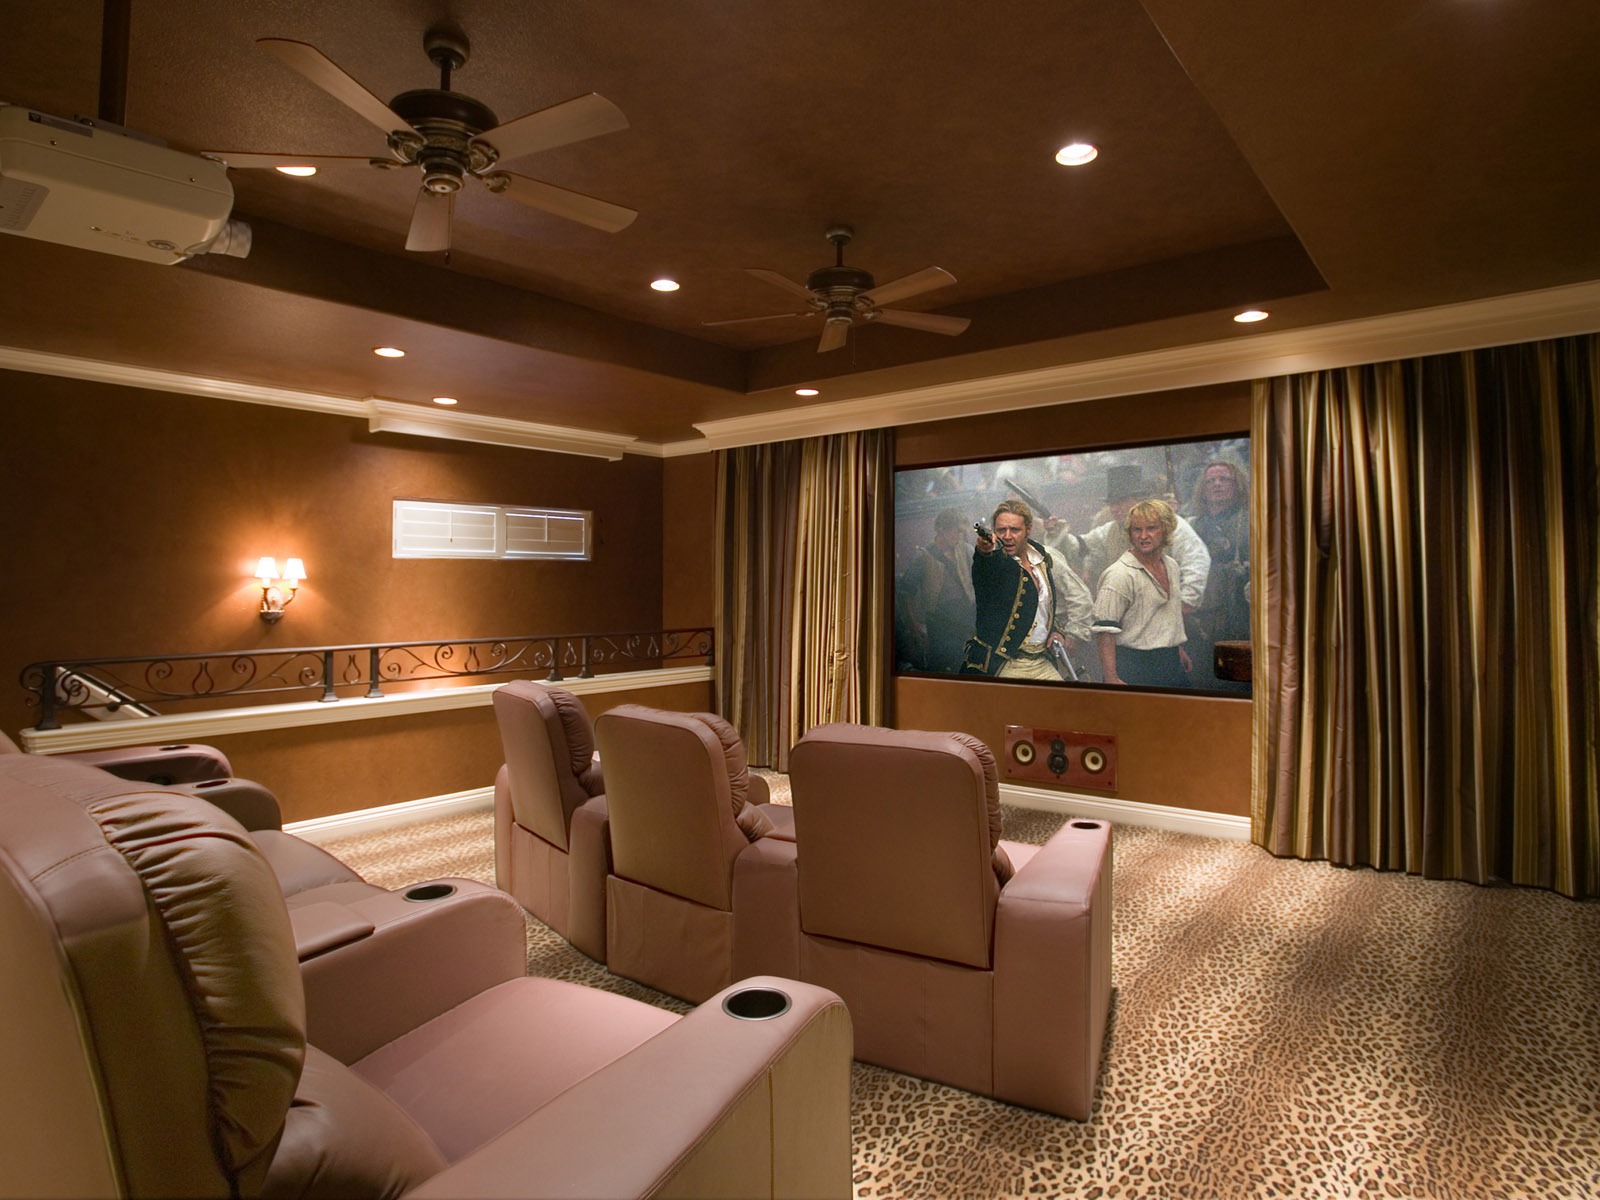 Home Theater wallpaper (2) #2 - 1600x1200